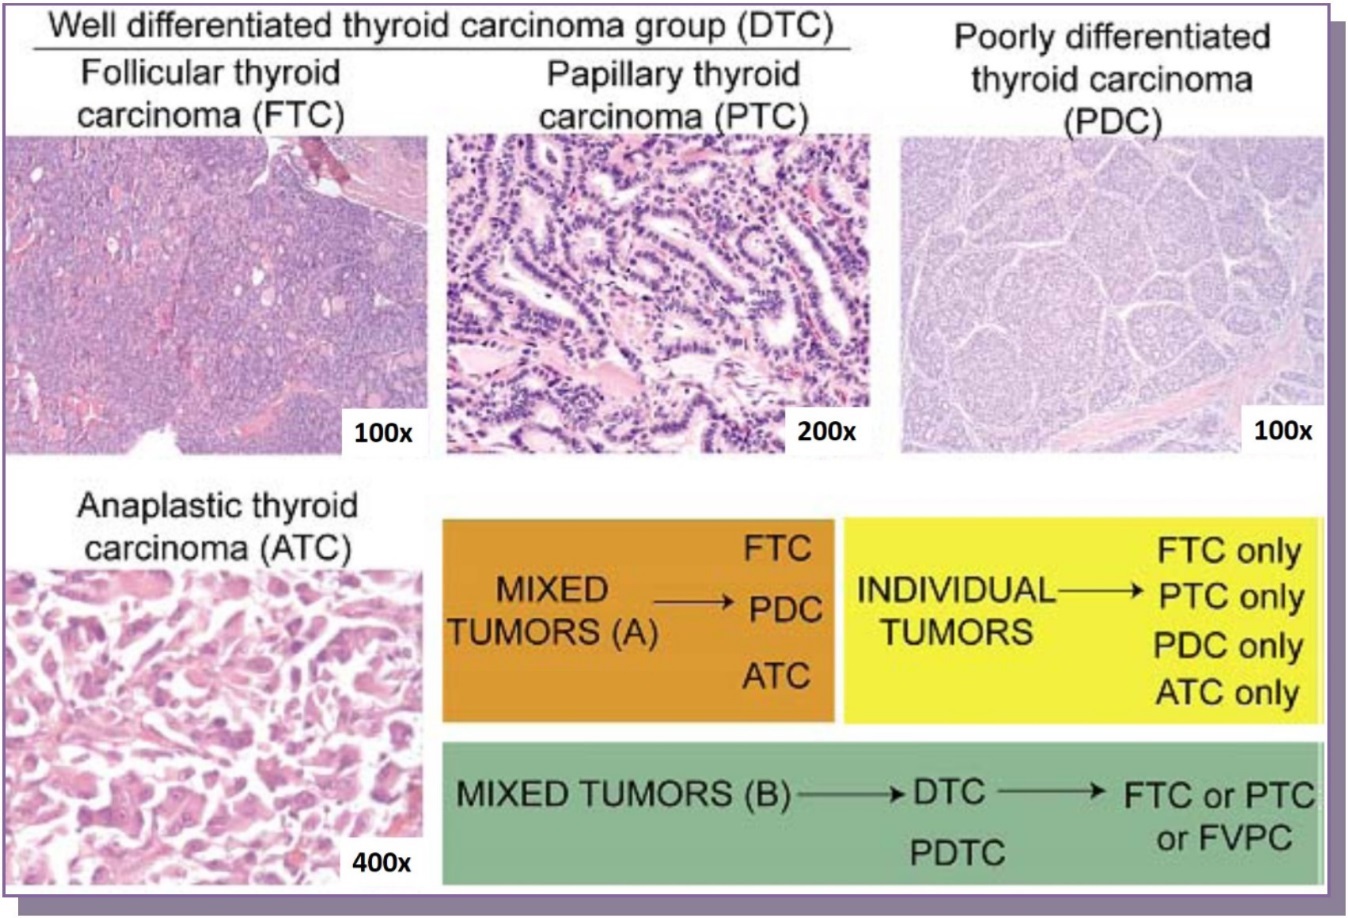   Representative histologies of well-differentiated thyroid carcinomas (follicular & papillary thyroid carcinomas, 100x and 200x magnification respectively), poorly differentiated thyroid carcinoma (100x) and anaplastic thyroid carcinoma (400x) are shown.  Cases were selected which either had a well-differentiated component, a mix of two tumors (well-differentiated and poorly differentiated, set B) or a mix of three (follicular carcinoma, poorly differentiated and anaplastic carcinoma, set A)